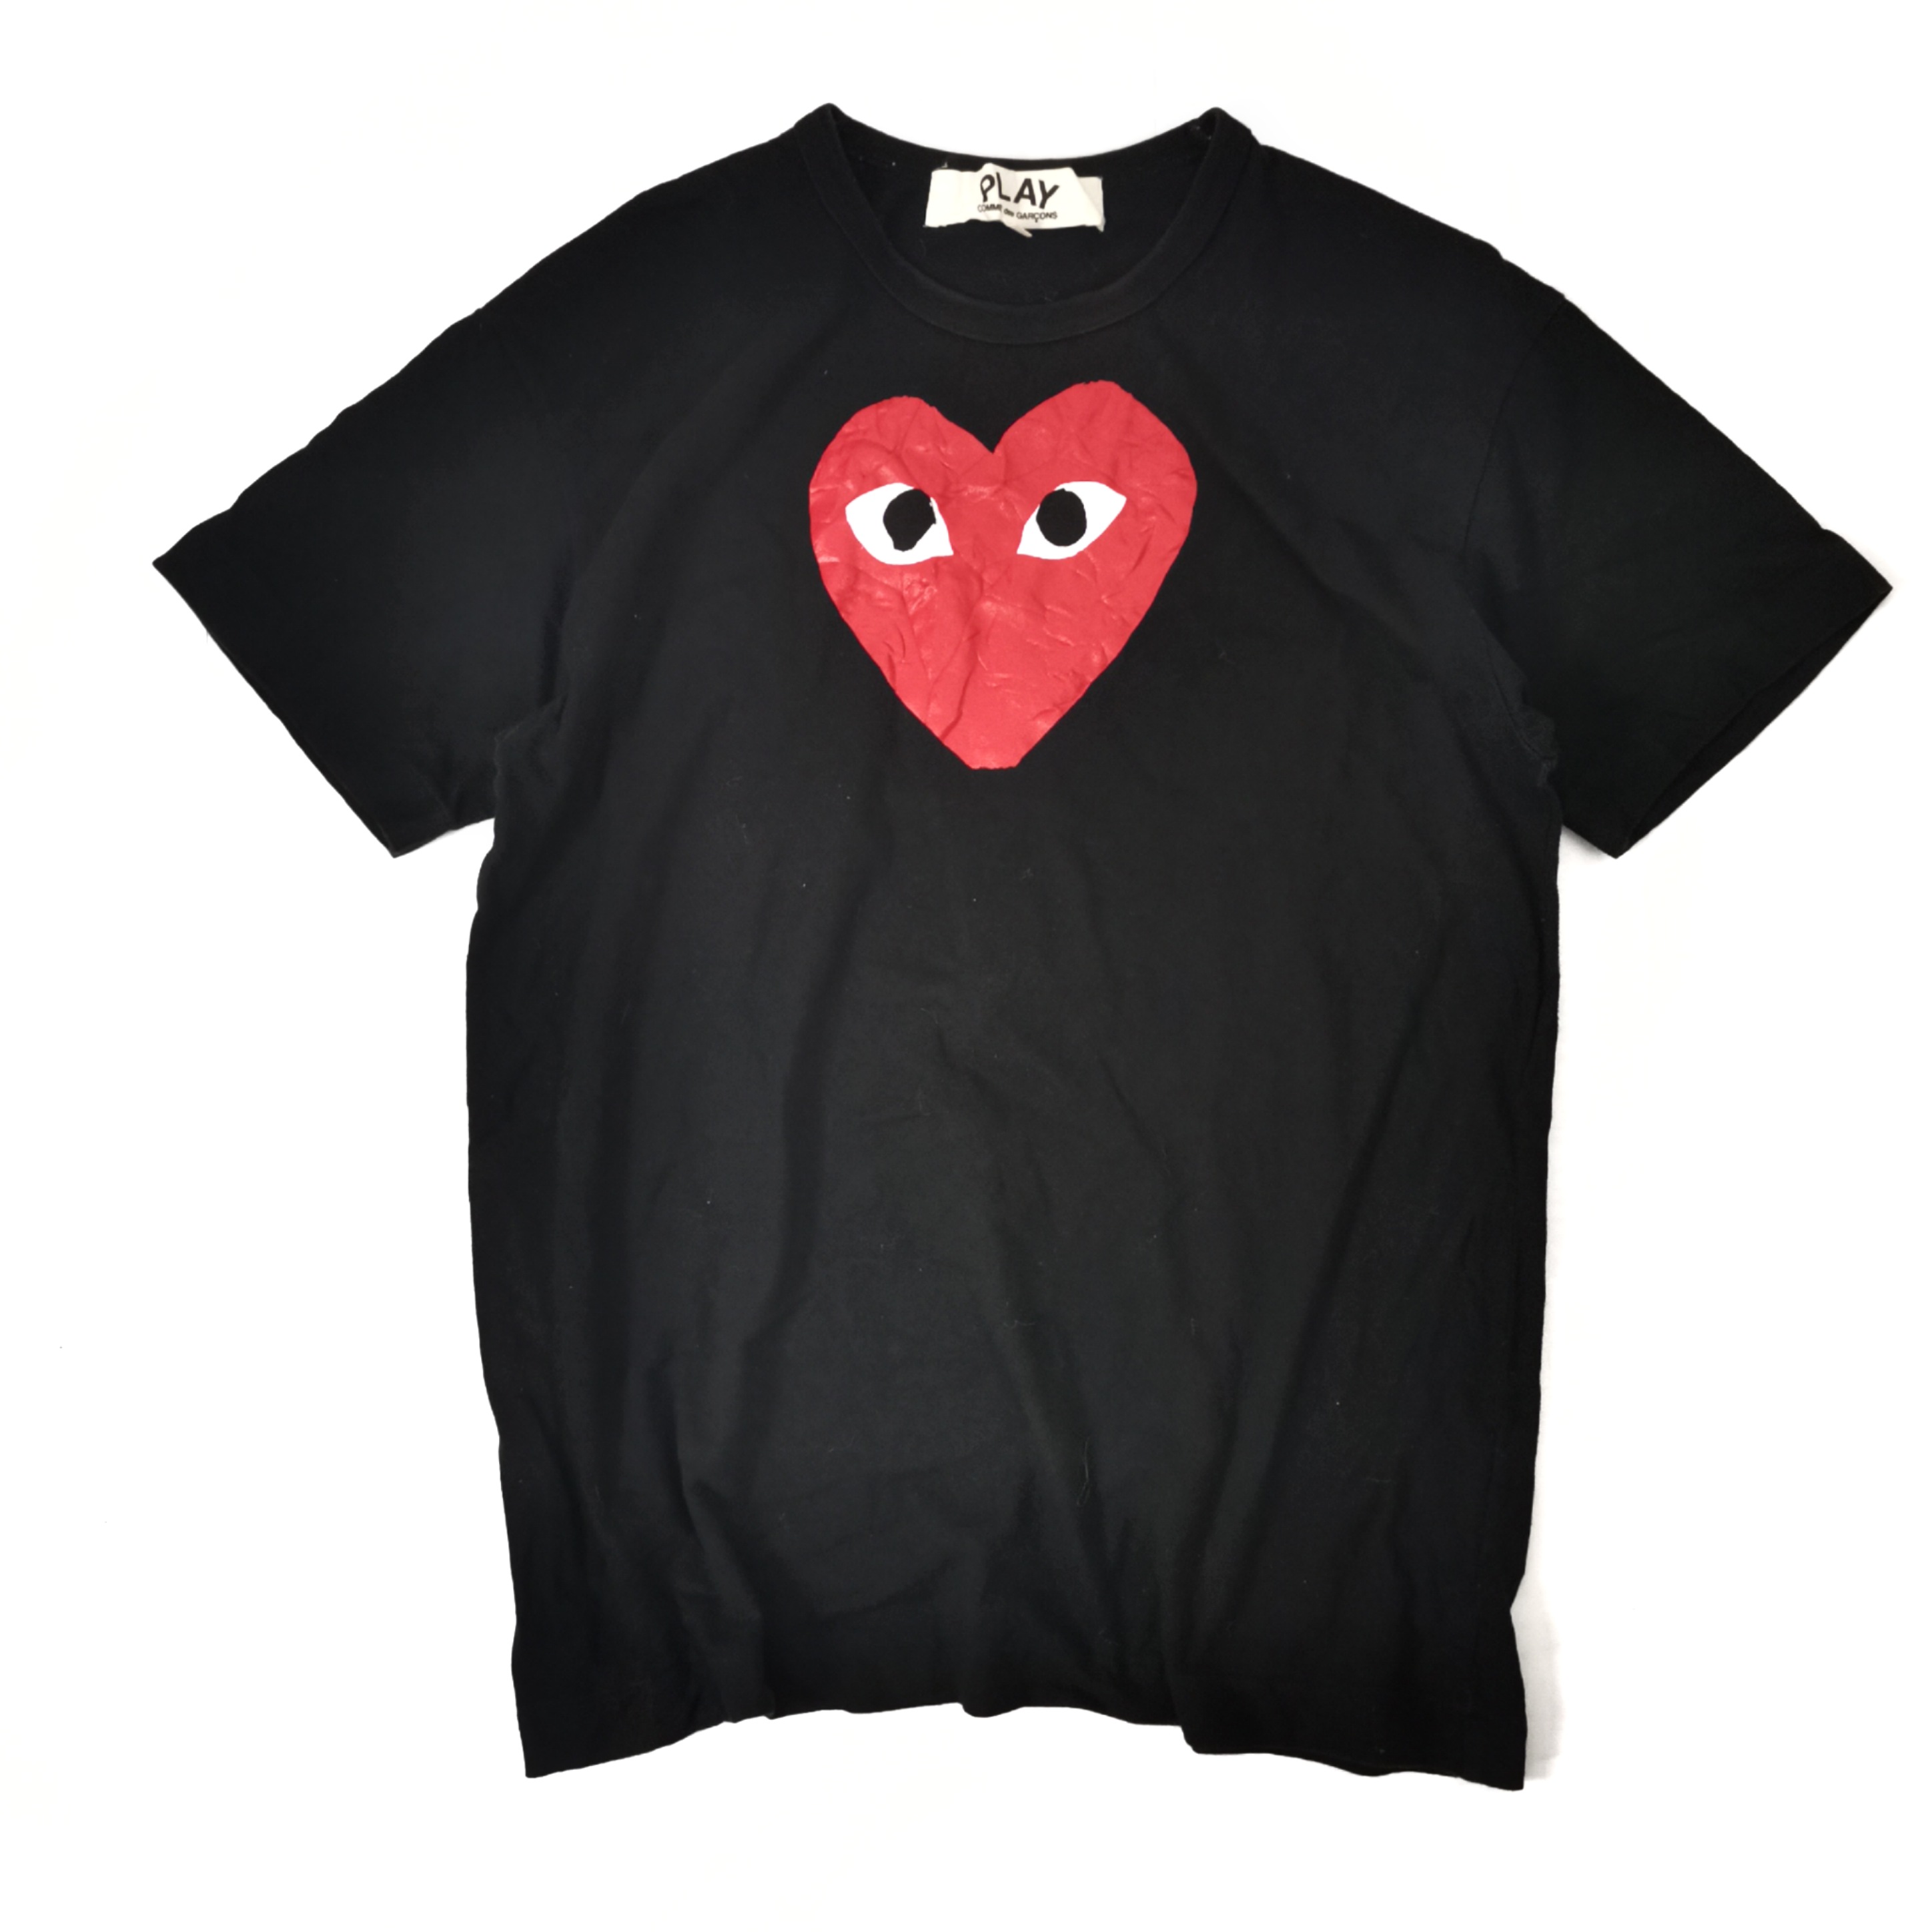 Big Heart Tee by Comme Des Garcon - 1